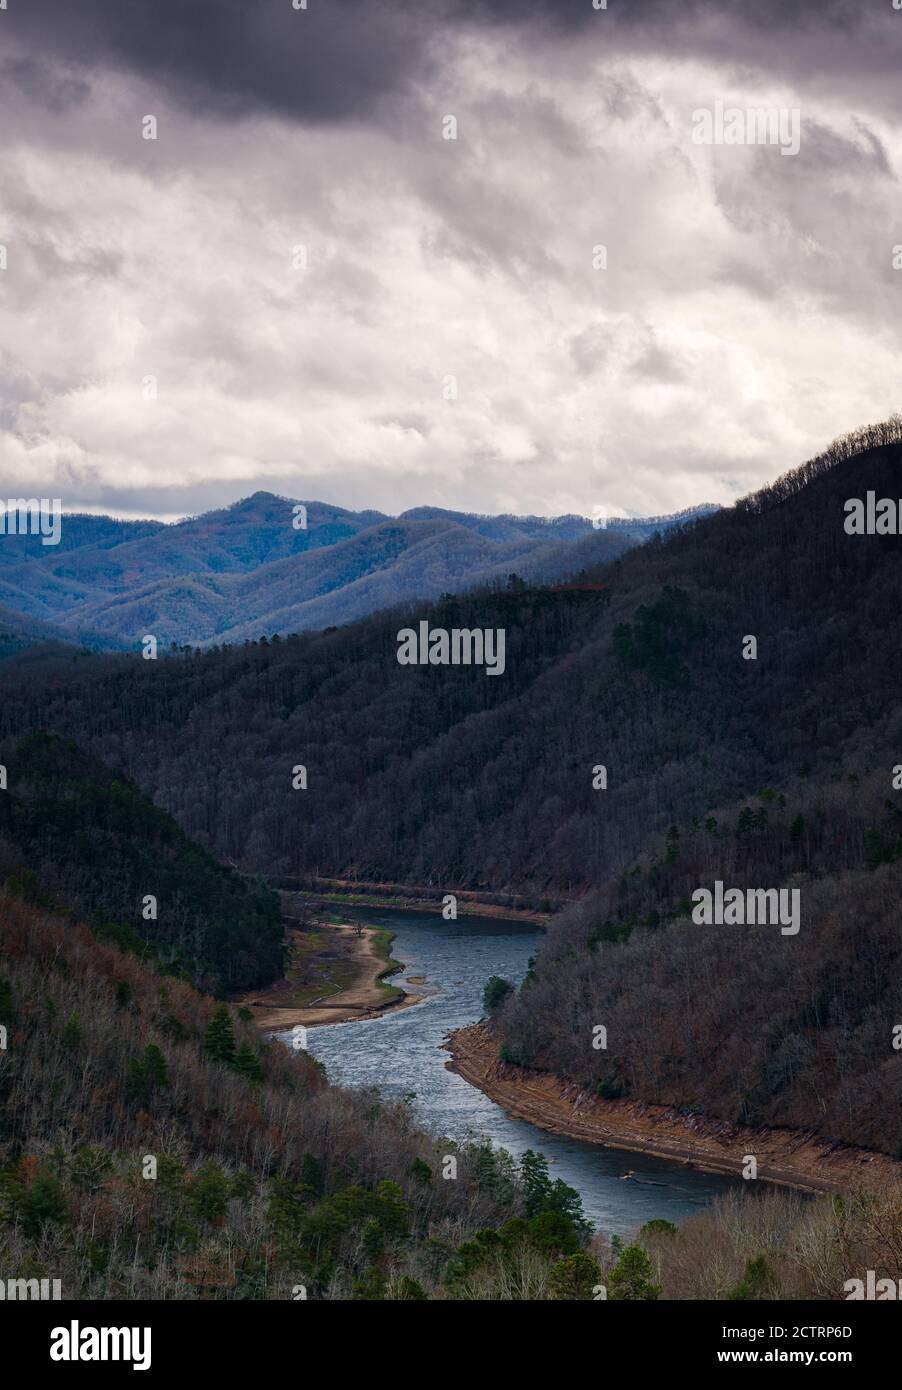 BRYSON CITY, NORTH CAROLINA - CIRCA DECEMBER 2019: View of Tuckasegee River and mountain from the Lakeview Drive close to Bryson City, in the Smoky Mo Stock Photo